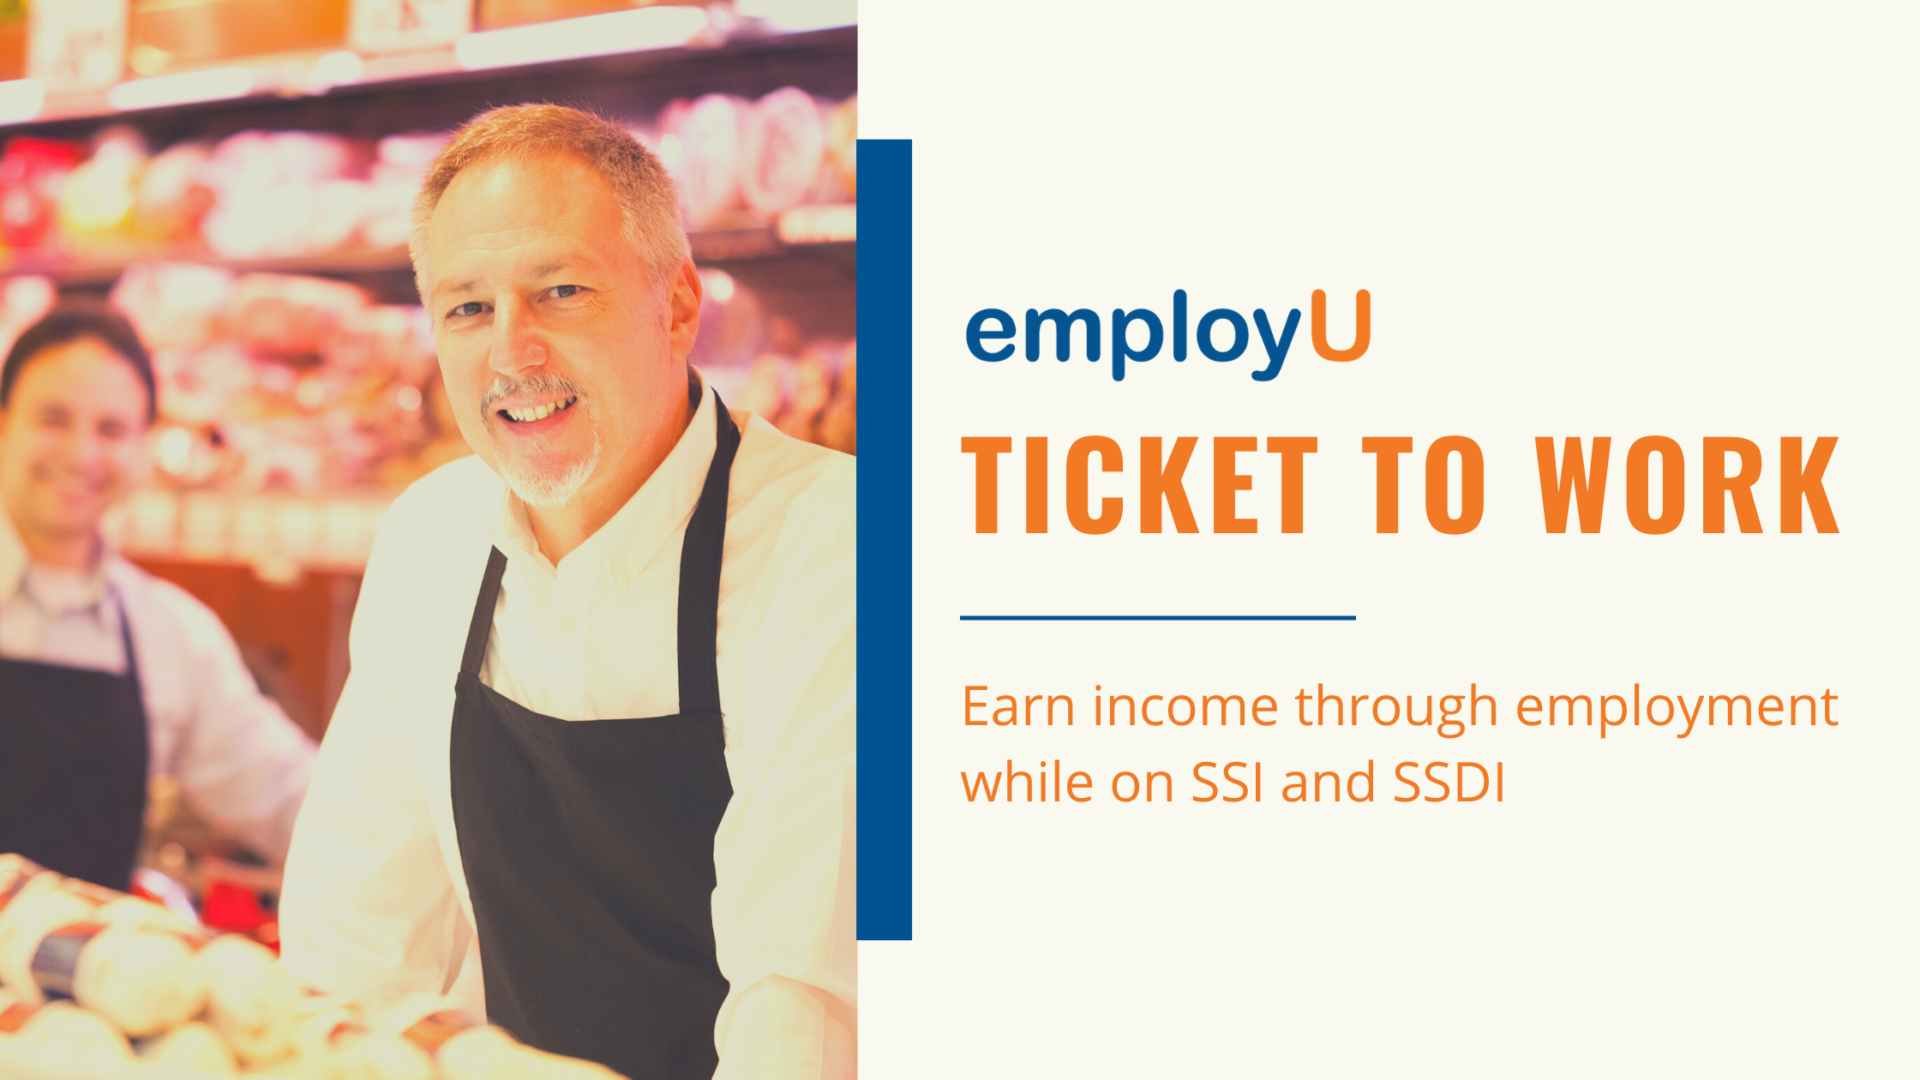 Grab Your Ticket to Work with employU